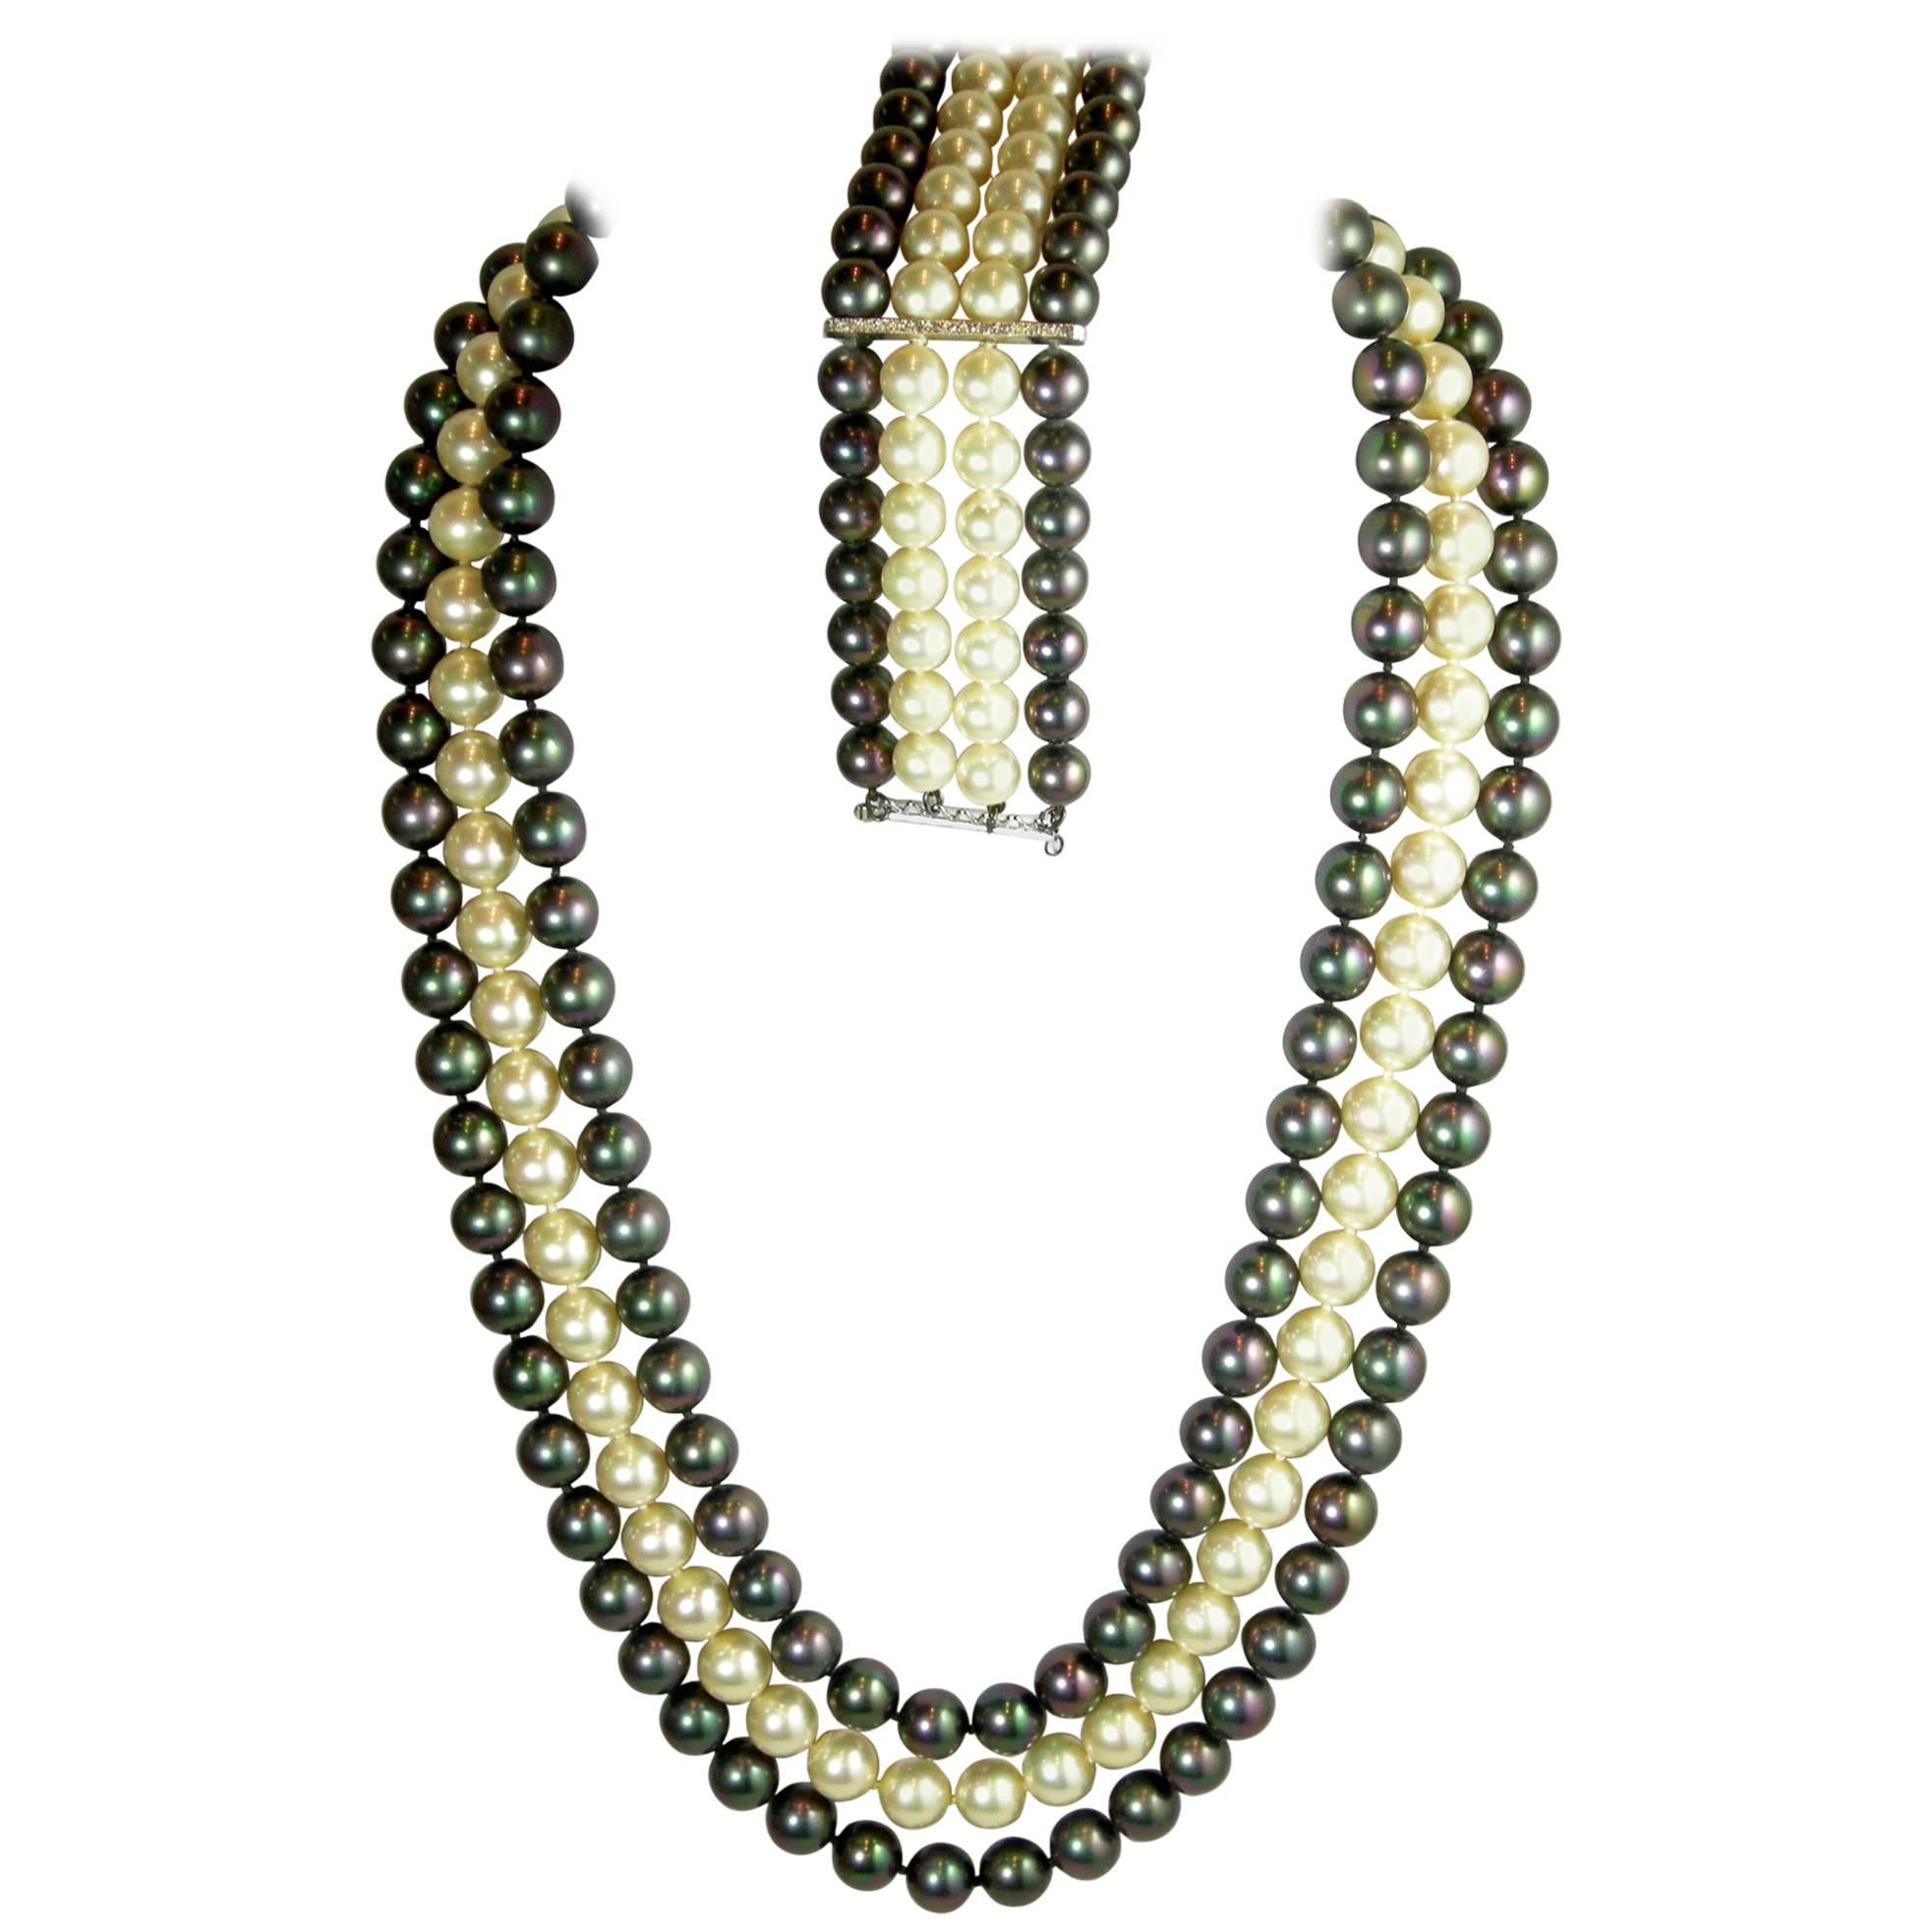  Three Strand Iridescent Vintage Faux Pearl Necklace and Bracelet For Sale